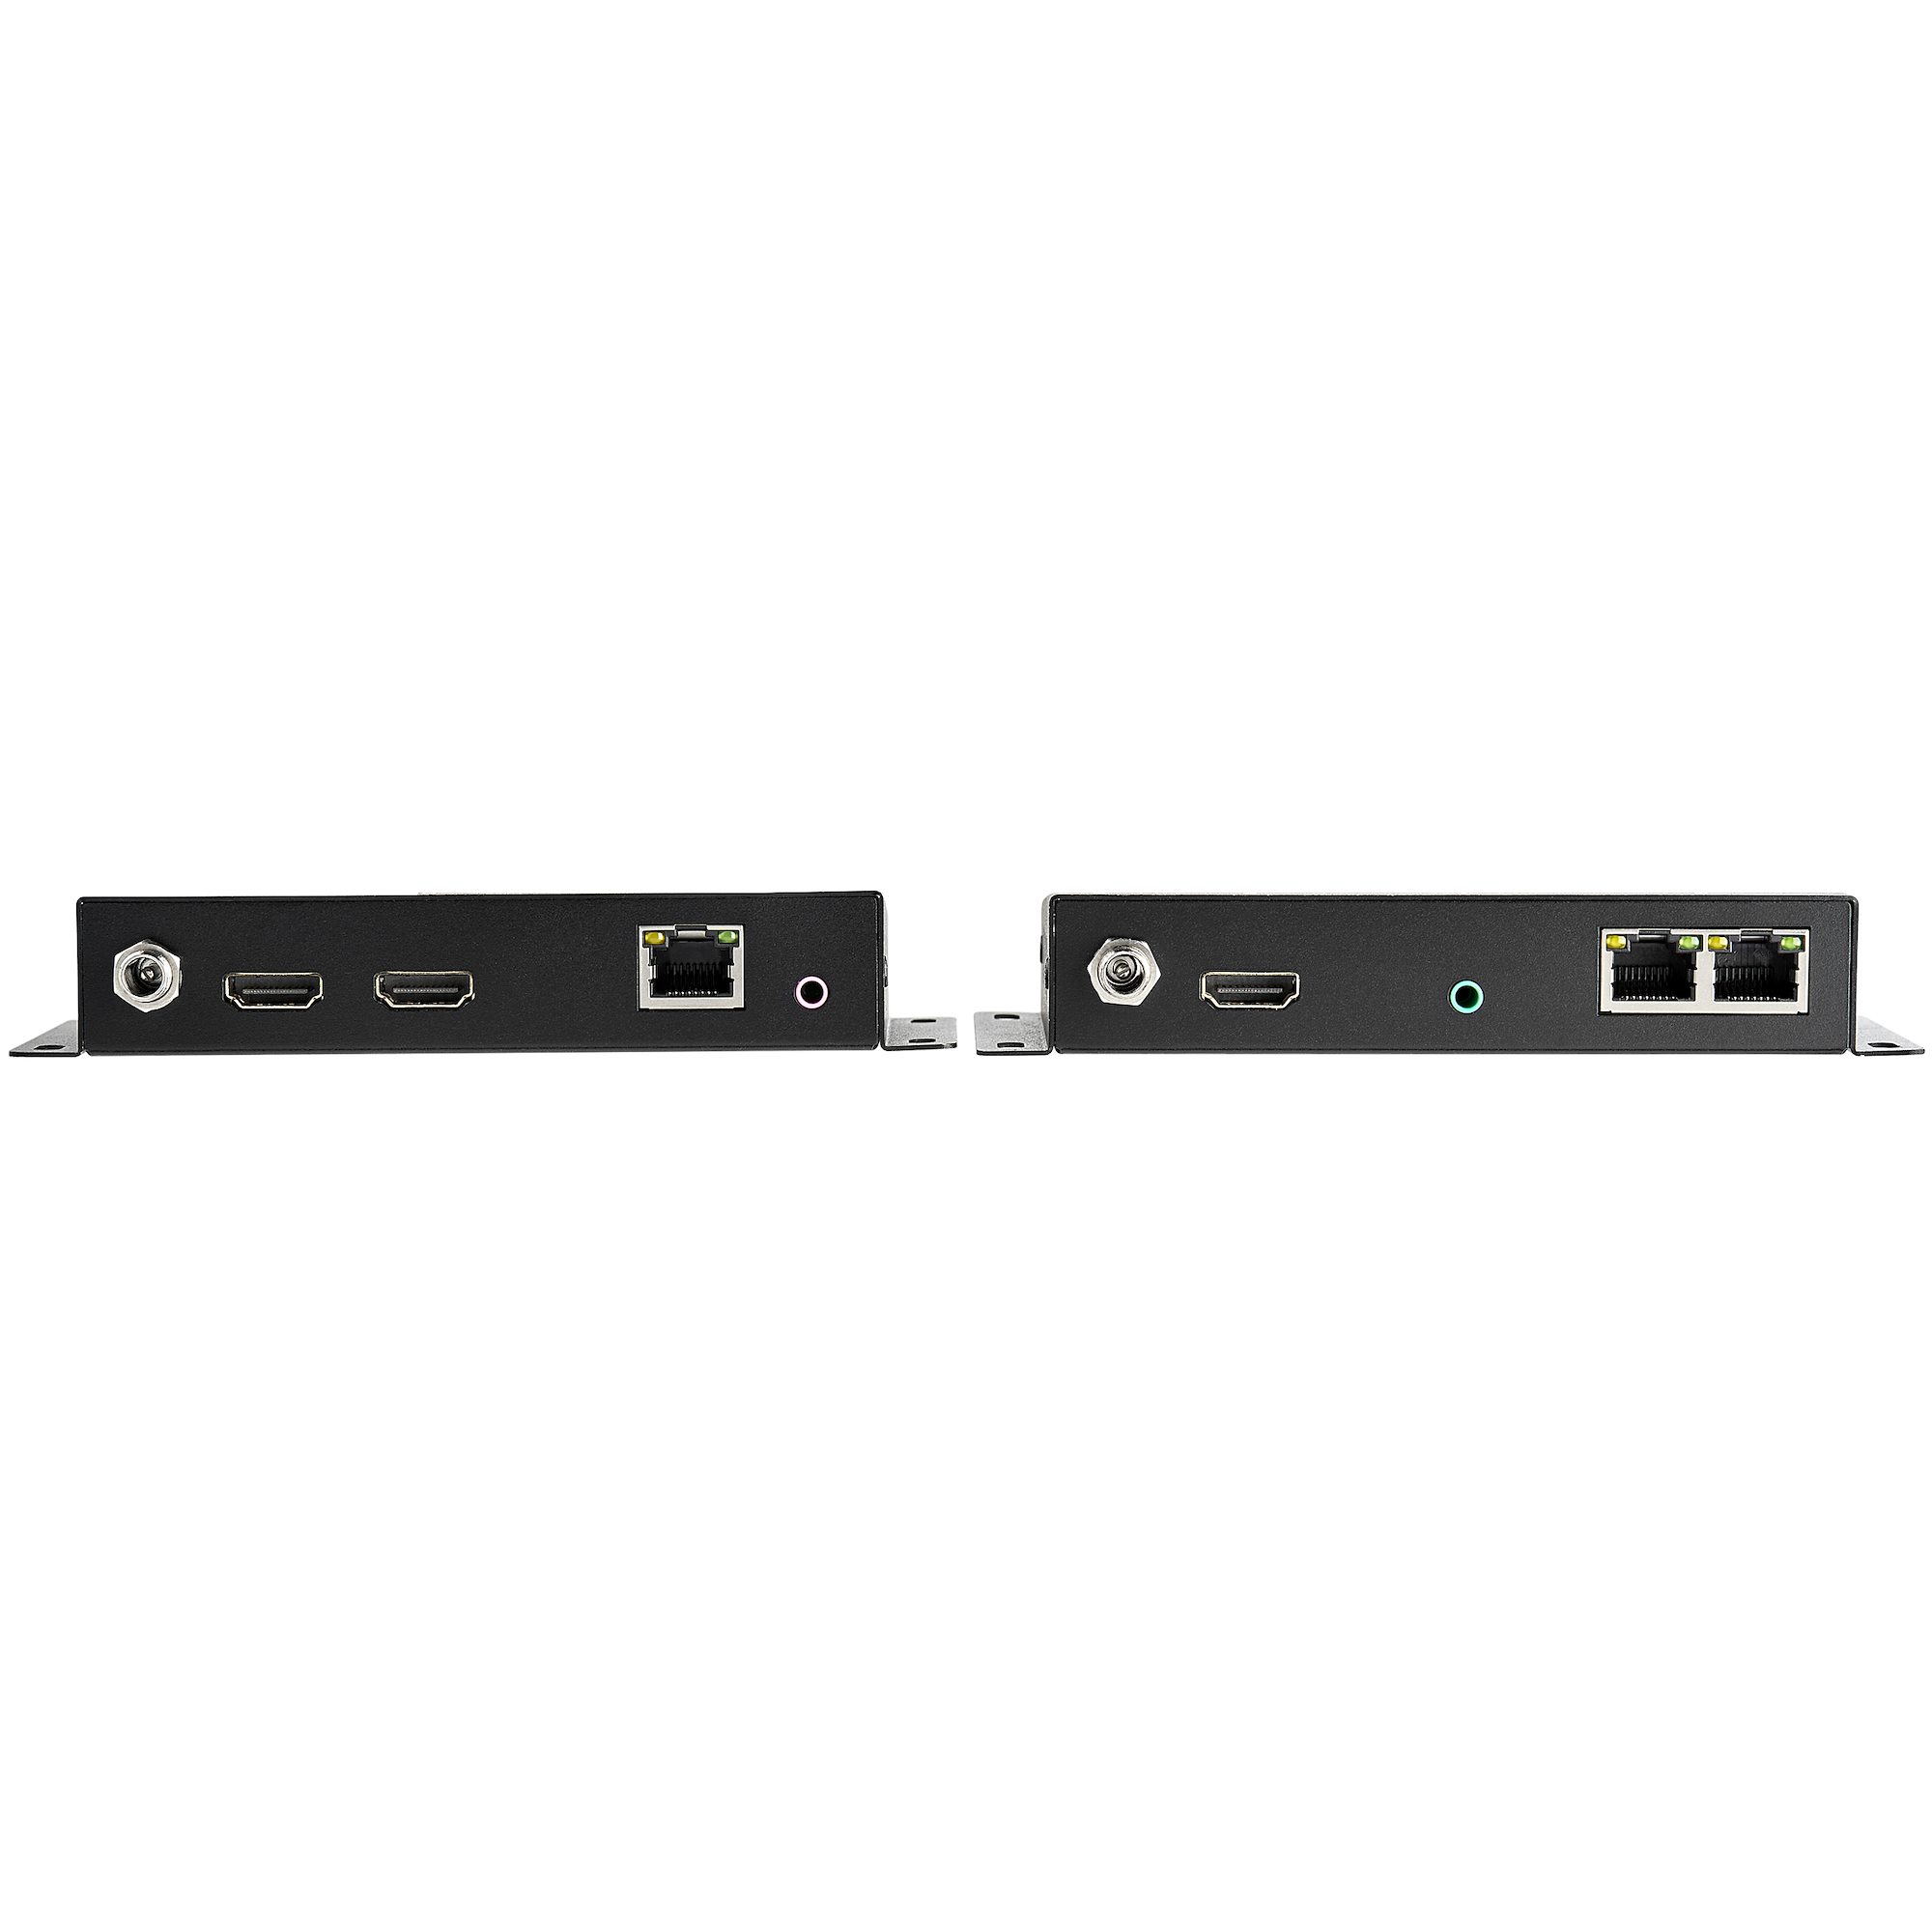 Over Cat5e/Cat6 Cable ST12MHDLNV StarTech.com HDMI Over IP Extender 1080p 60Hz HDMI Video Over Ethernet/LAN Extender Through Network Switch Transmitter/Receiver Kit up to 490ft 150m